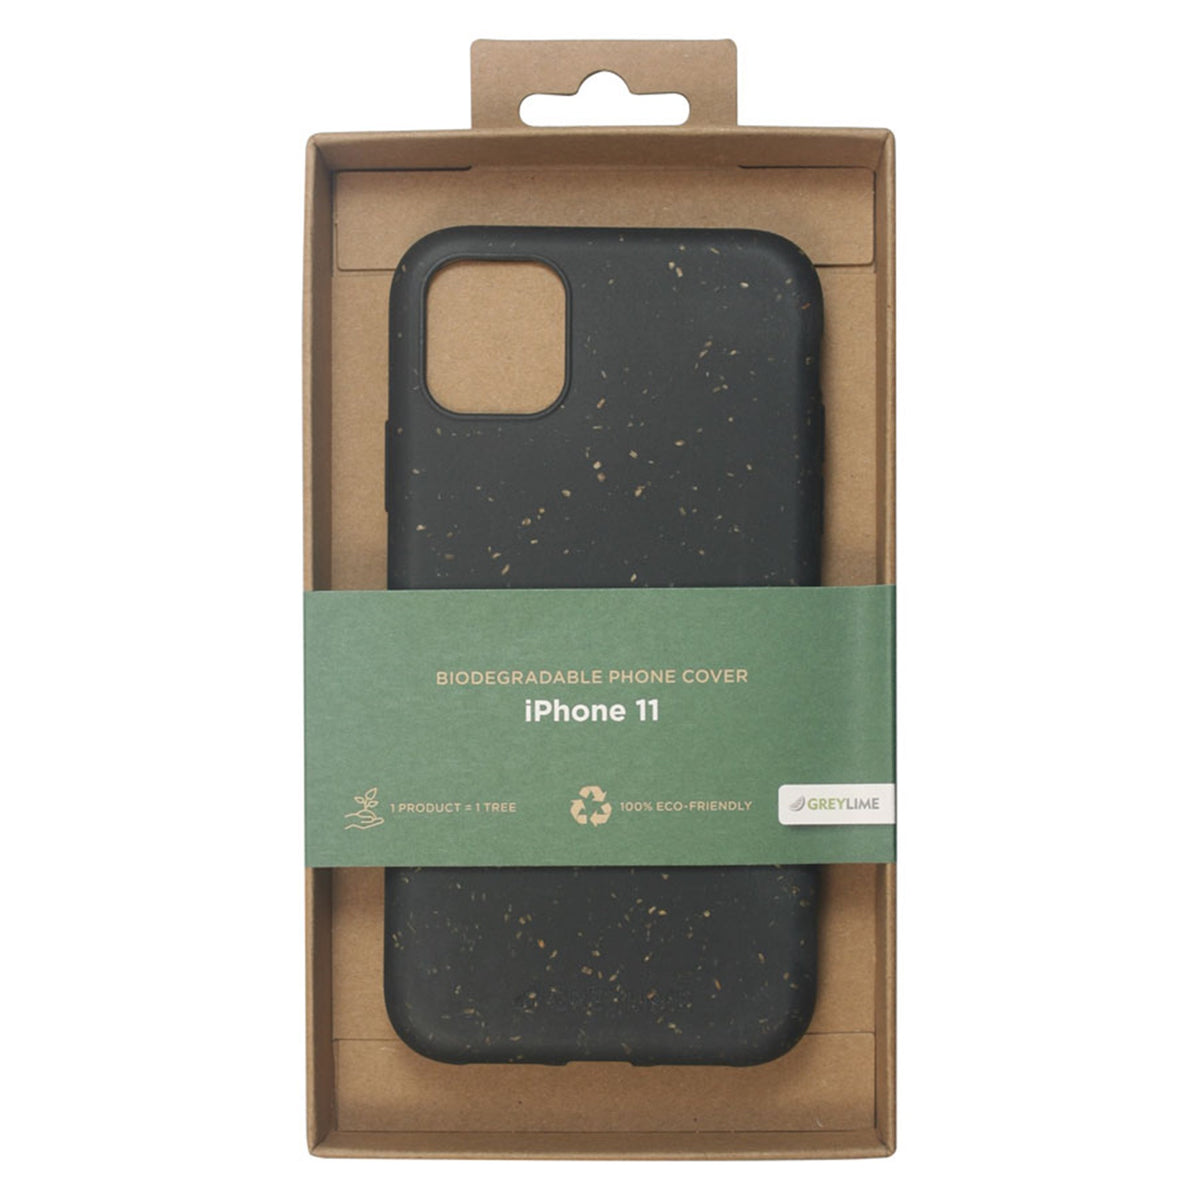 COIP1109 Greylime Iphone 11 Biodegradable Cover Black 6